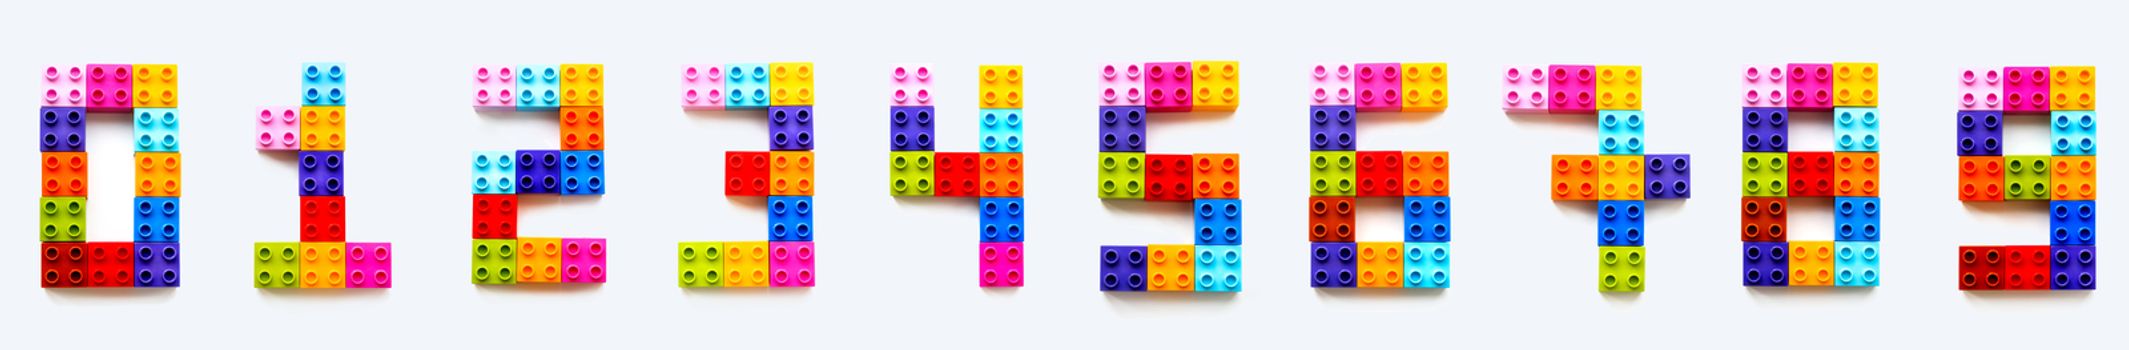 Set of numbers from 0 to 9 made of colorful constructor blocks. Toy bricks lying in order from zero to nine. Education process - learning numbers with child using multicolored toy details.